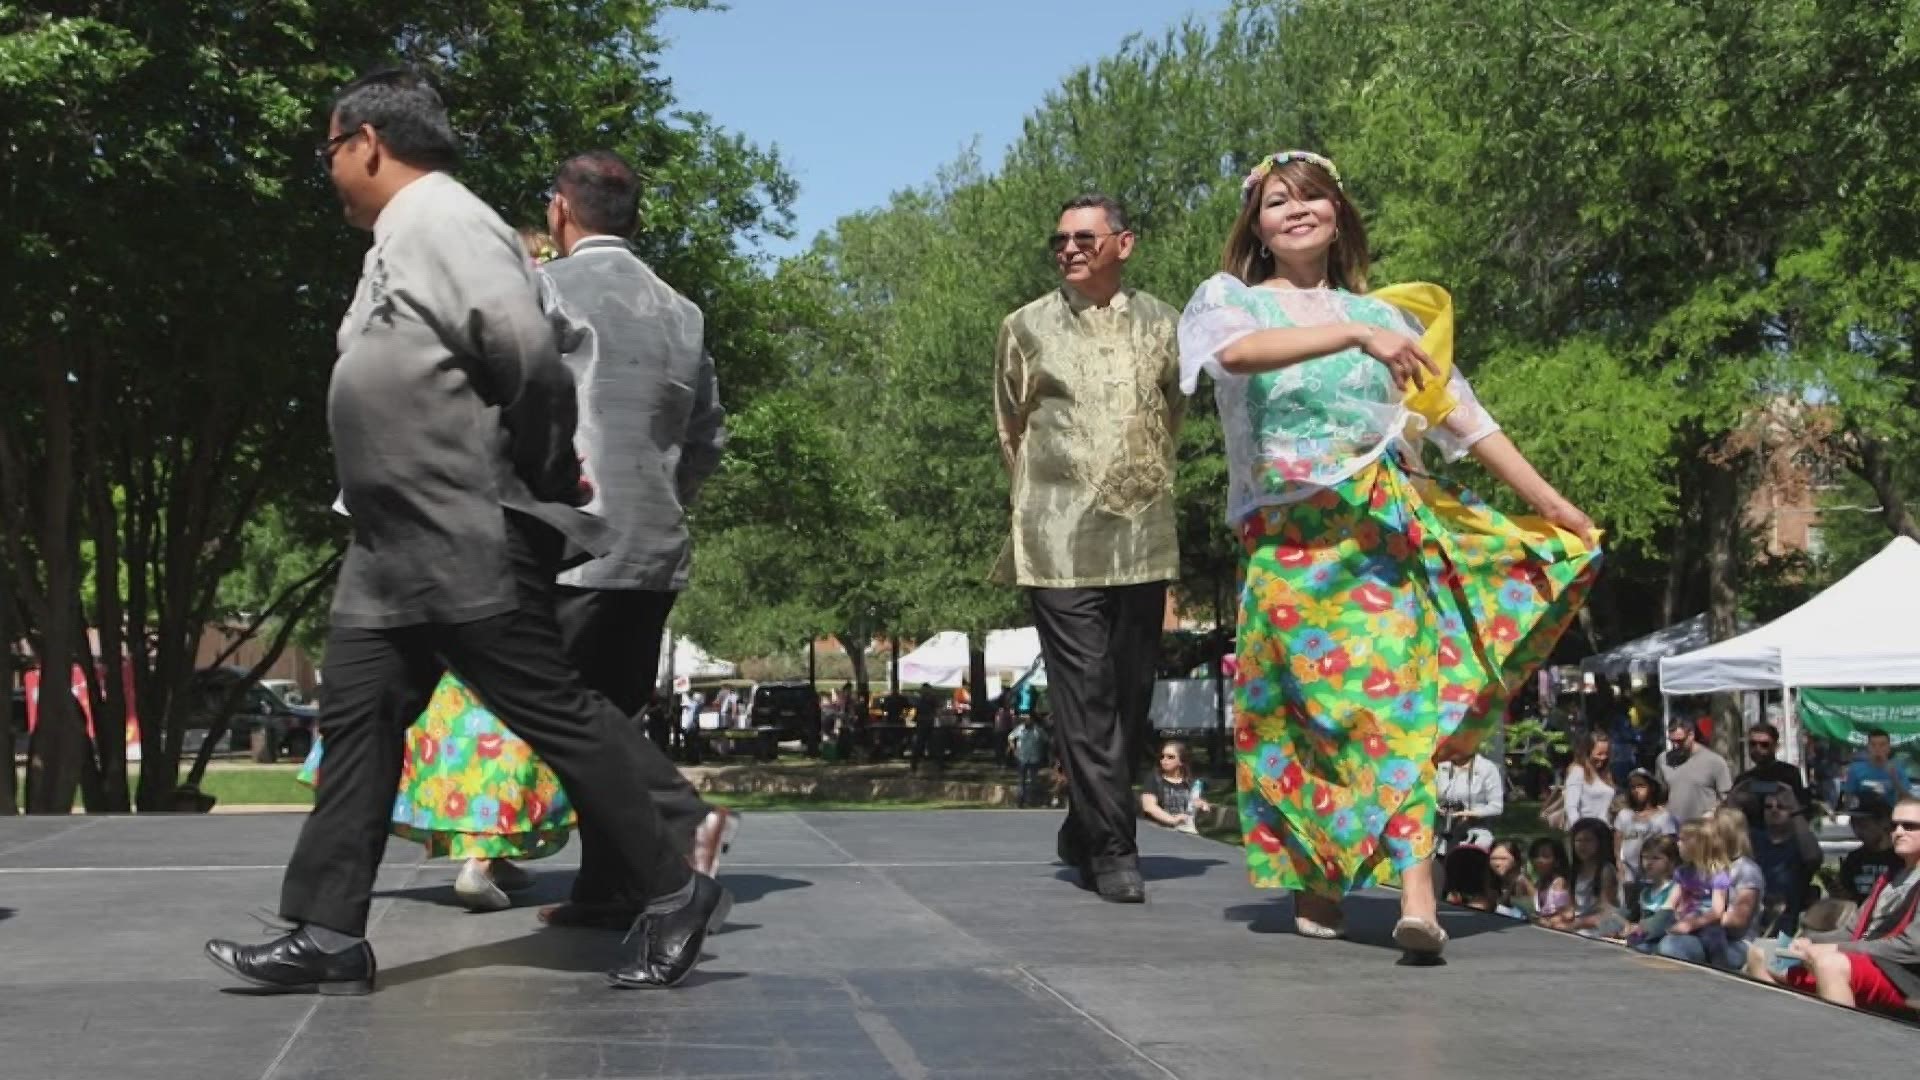 The 17th annual Asian American Heritage Festival is Saturday at 11 a.m. No tickets are needed. Anyone can watch the livestream for free online.